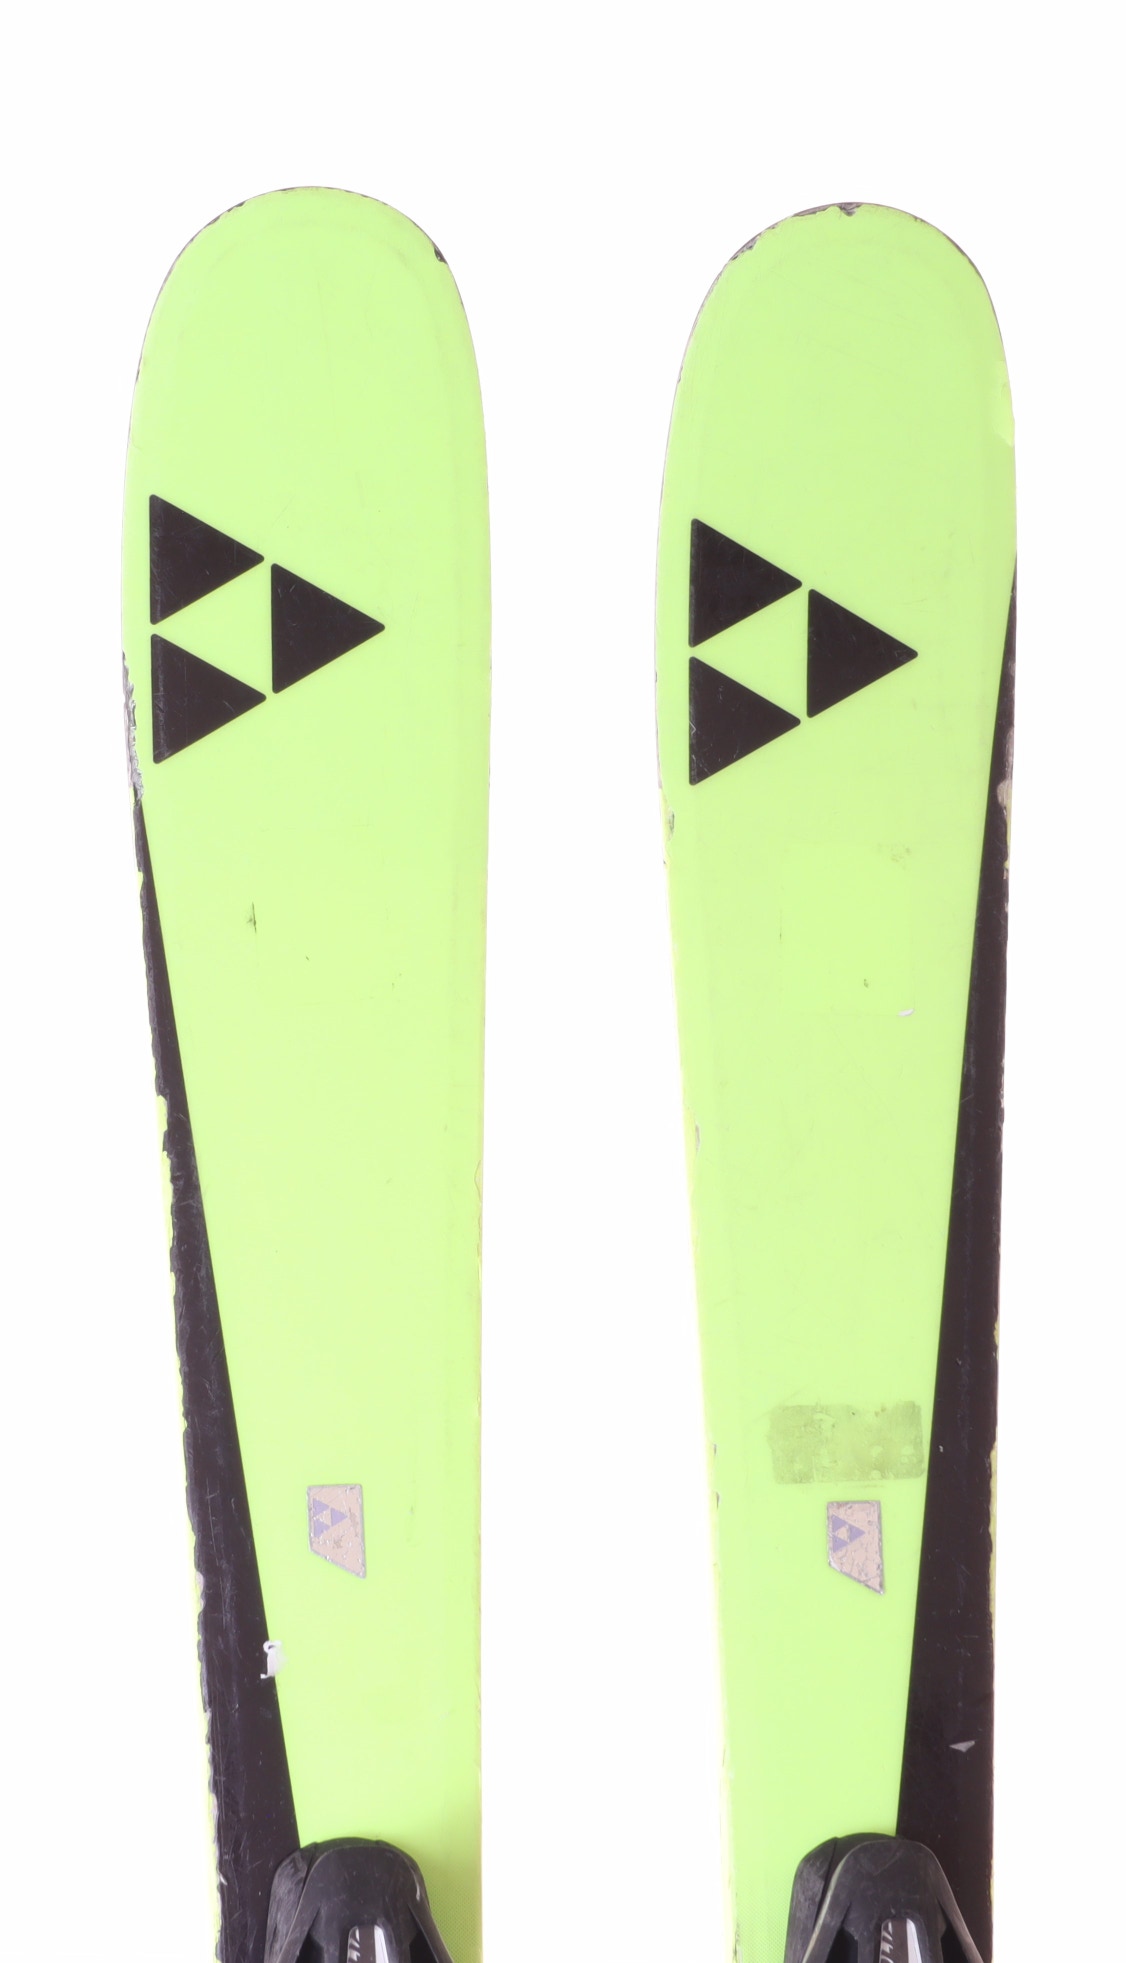 Used 2018 Fischer Ranger FR Demo Ski with Bindings Size 142 (Option 221219)